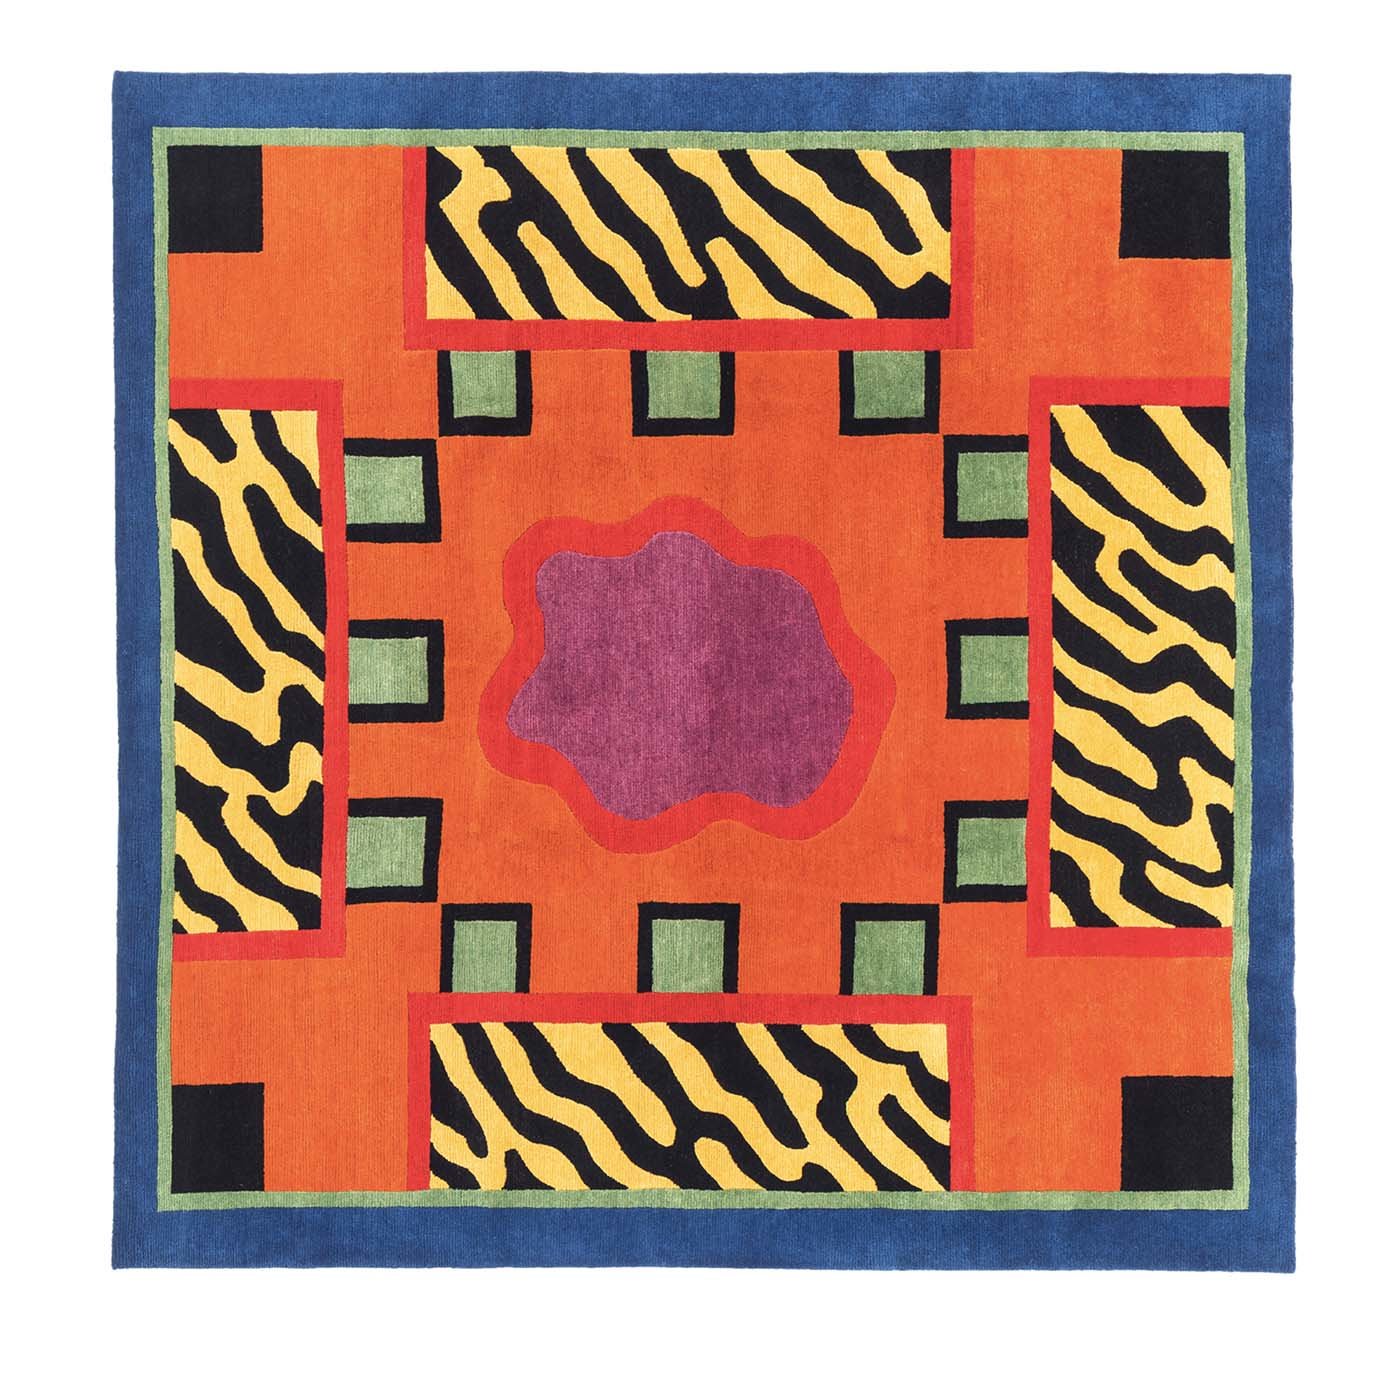 Equador Tapestry by Nathalie Du Pasquier - Post Design - Main view